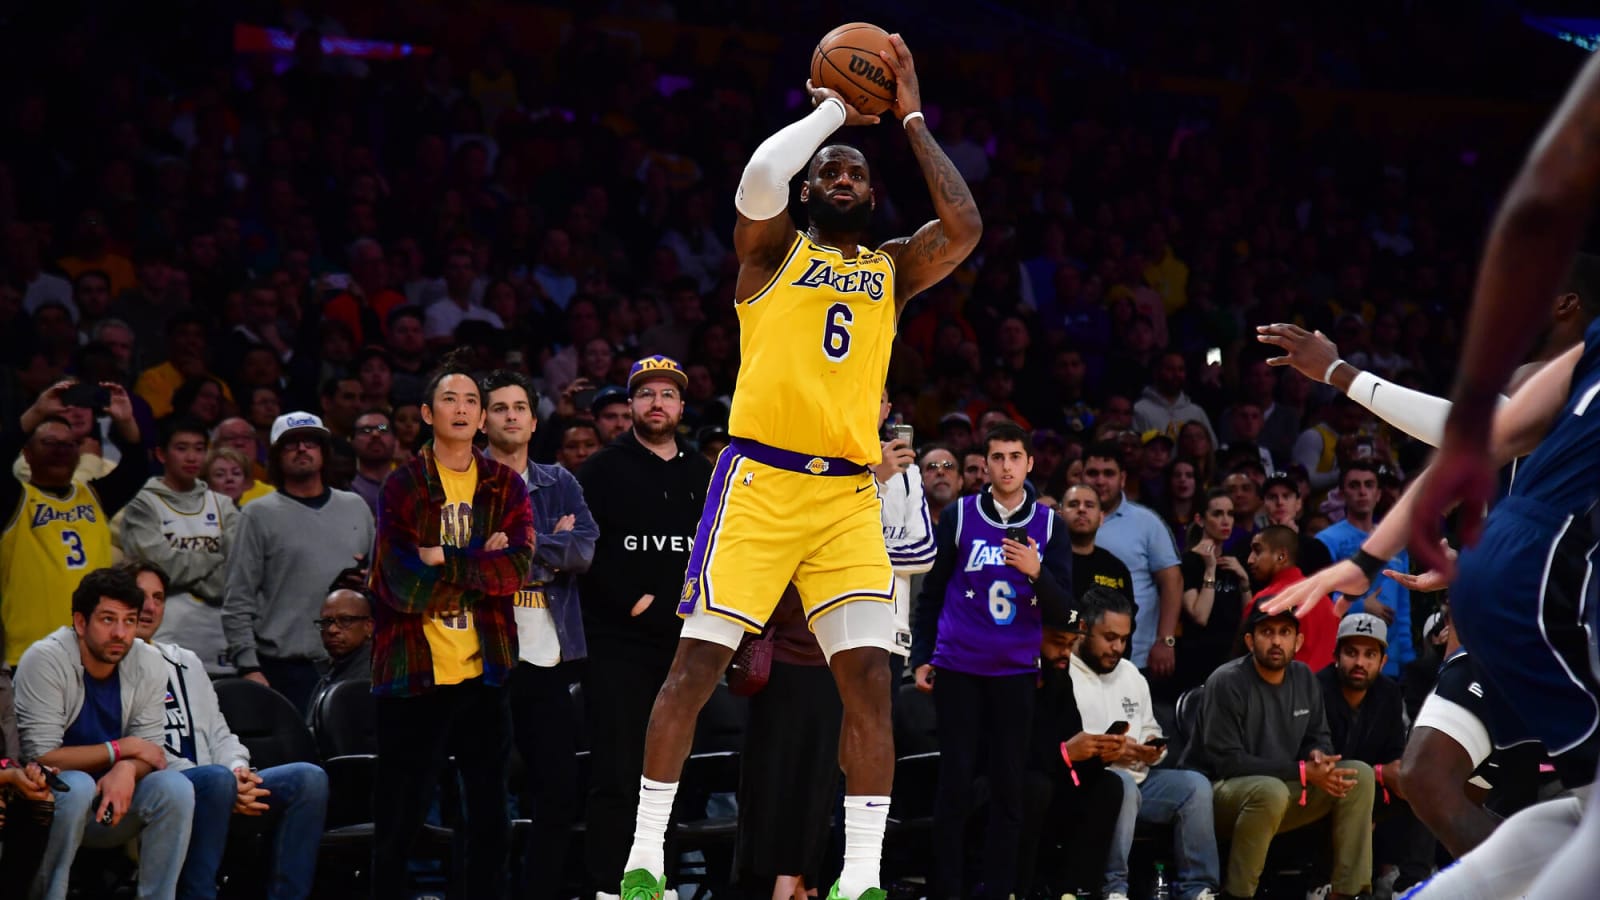 "We’re Hyping Up A Team Not Getting In The Play In?", NBA Fans Blast Los Angeles Lakers Despite Being Two Games Away From 6th Seed